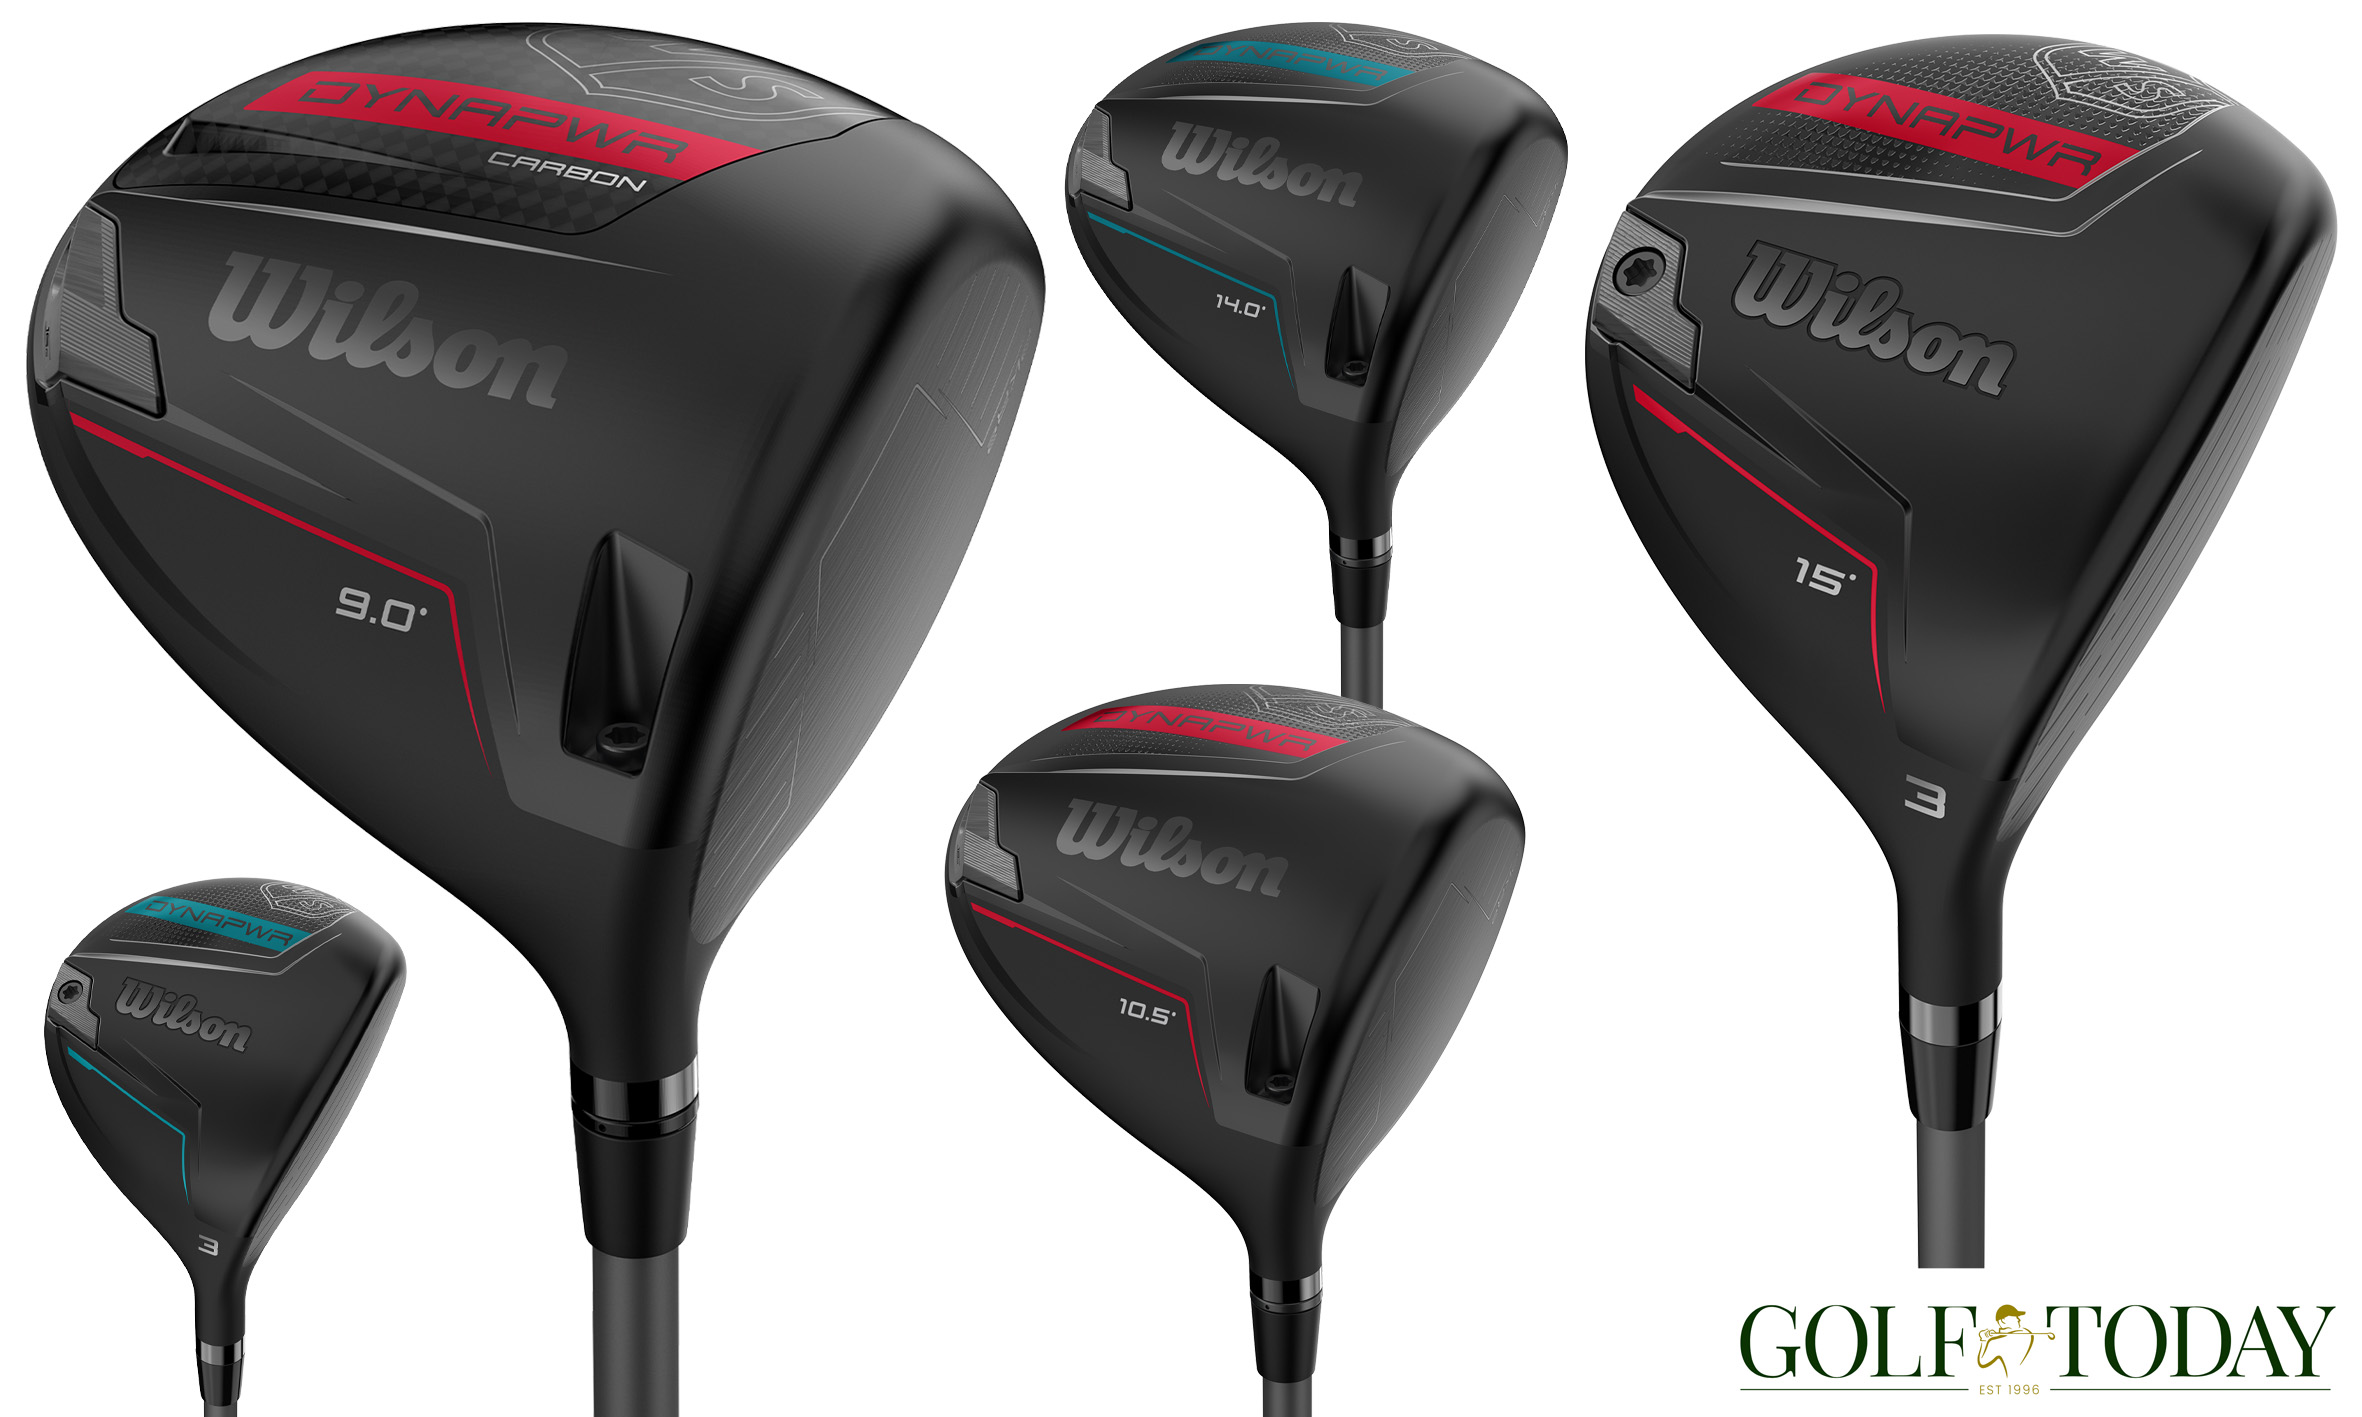 Wilson's Dynapower driver offers clear choice between carbon and titanium